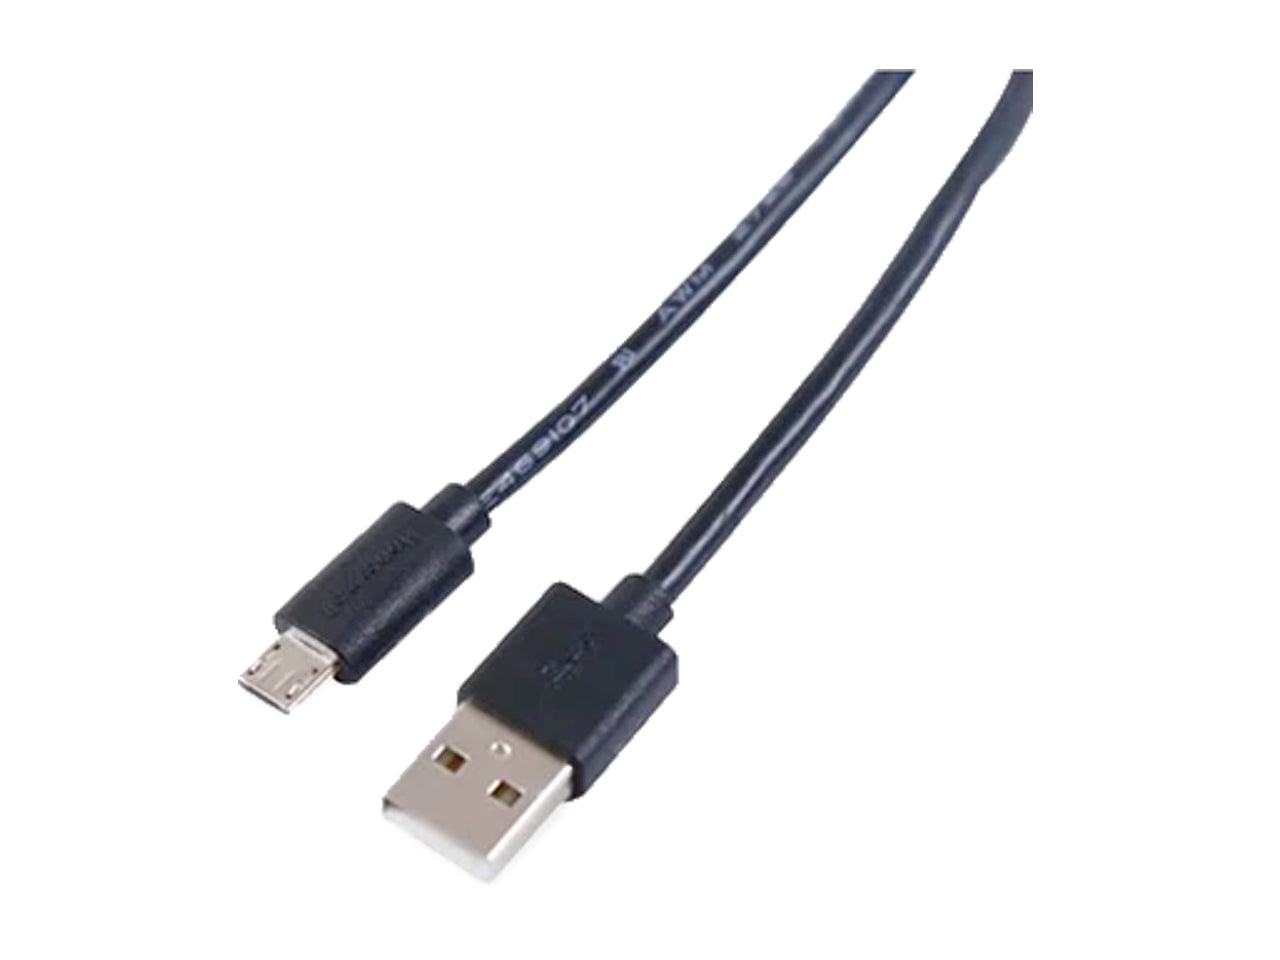 Honeywell USB to Micro USB Cable (Non-Braided) Black